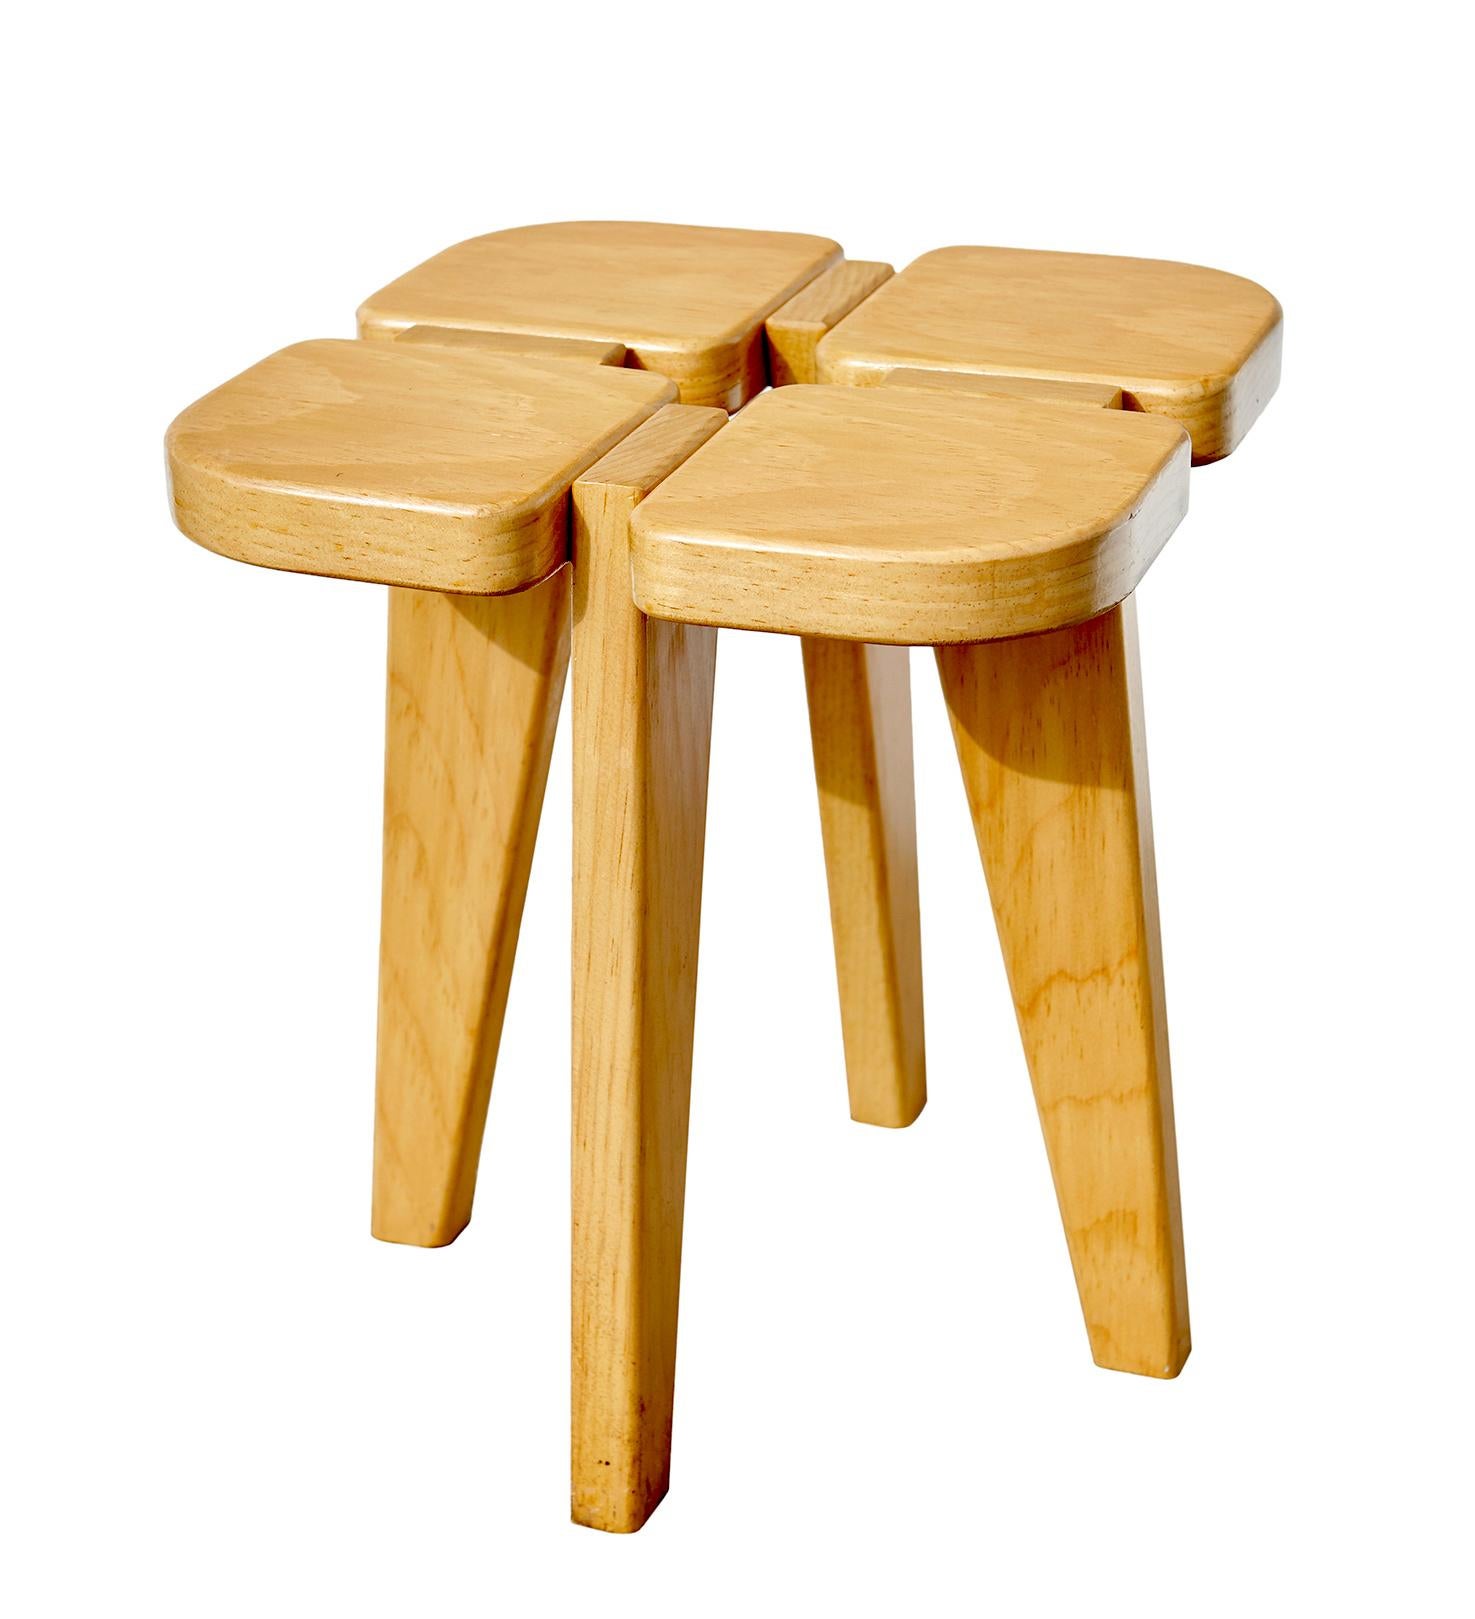 Lisa Johansson-Pape (1907-1989), best known for her serene lamp designs, approached the development of this stool almost as an architectural exercise. Made in Finland of Baltic pine, the stool's novel construction yields a simple piece of furniture